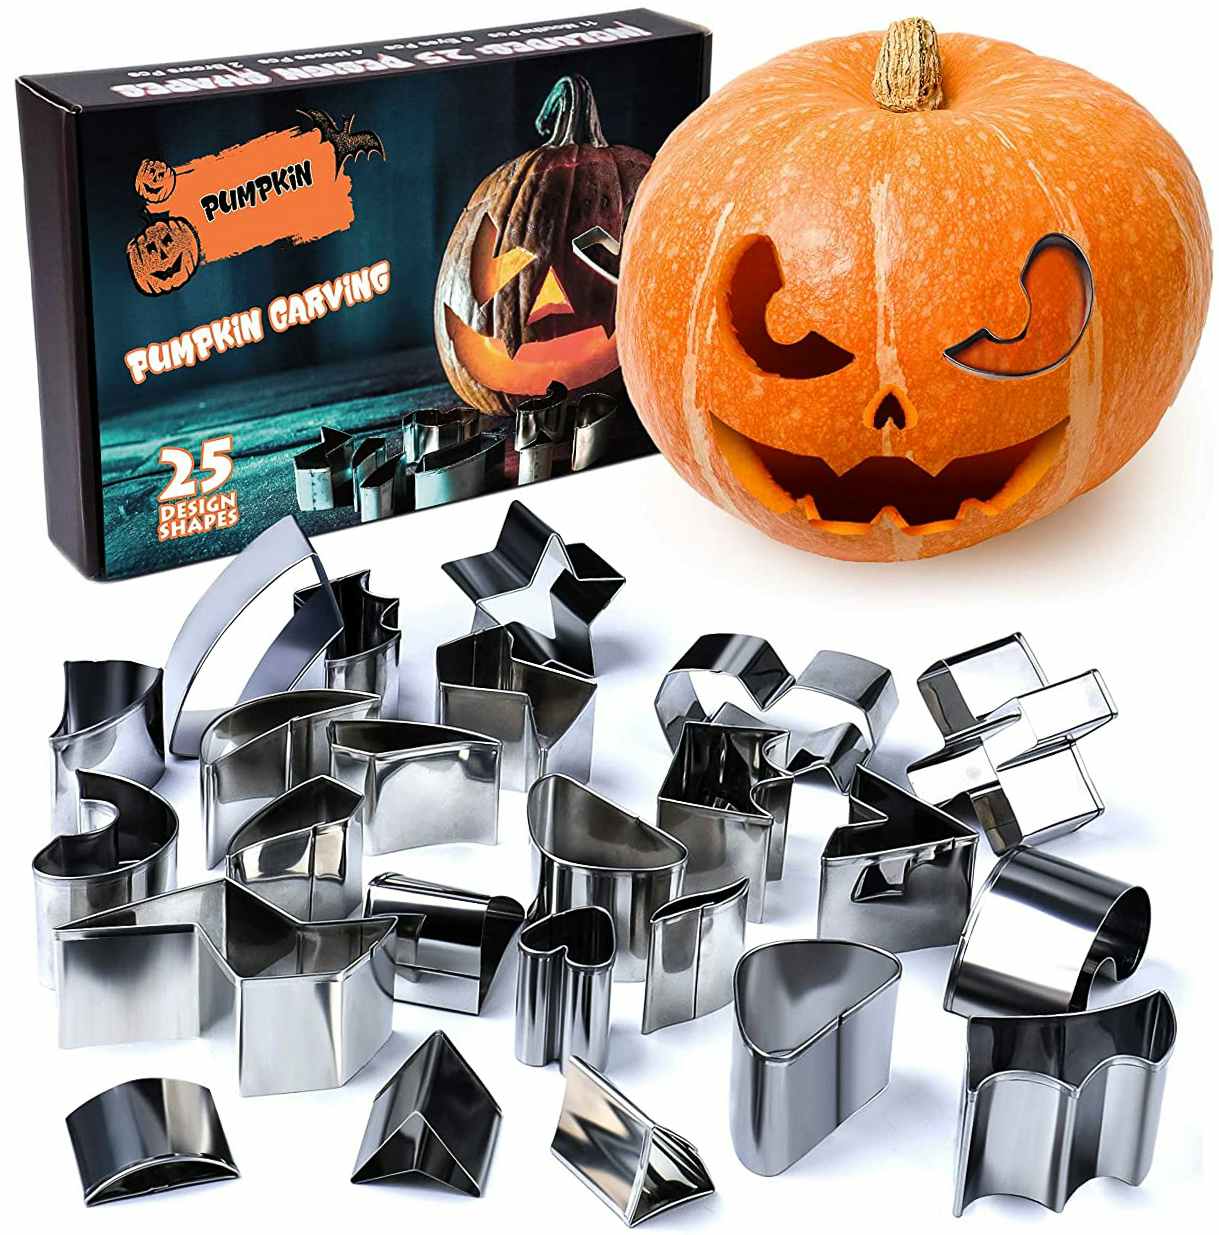 best pumpkin carving kit - A GUCED Pumpkin Carving Kit on a white background